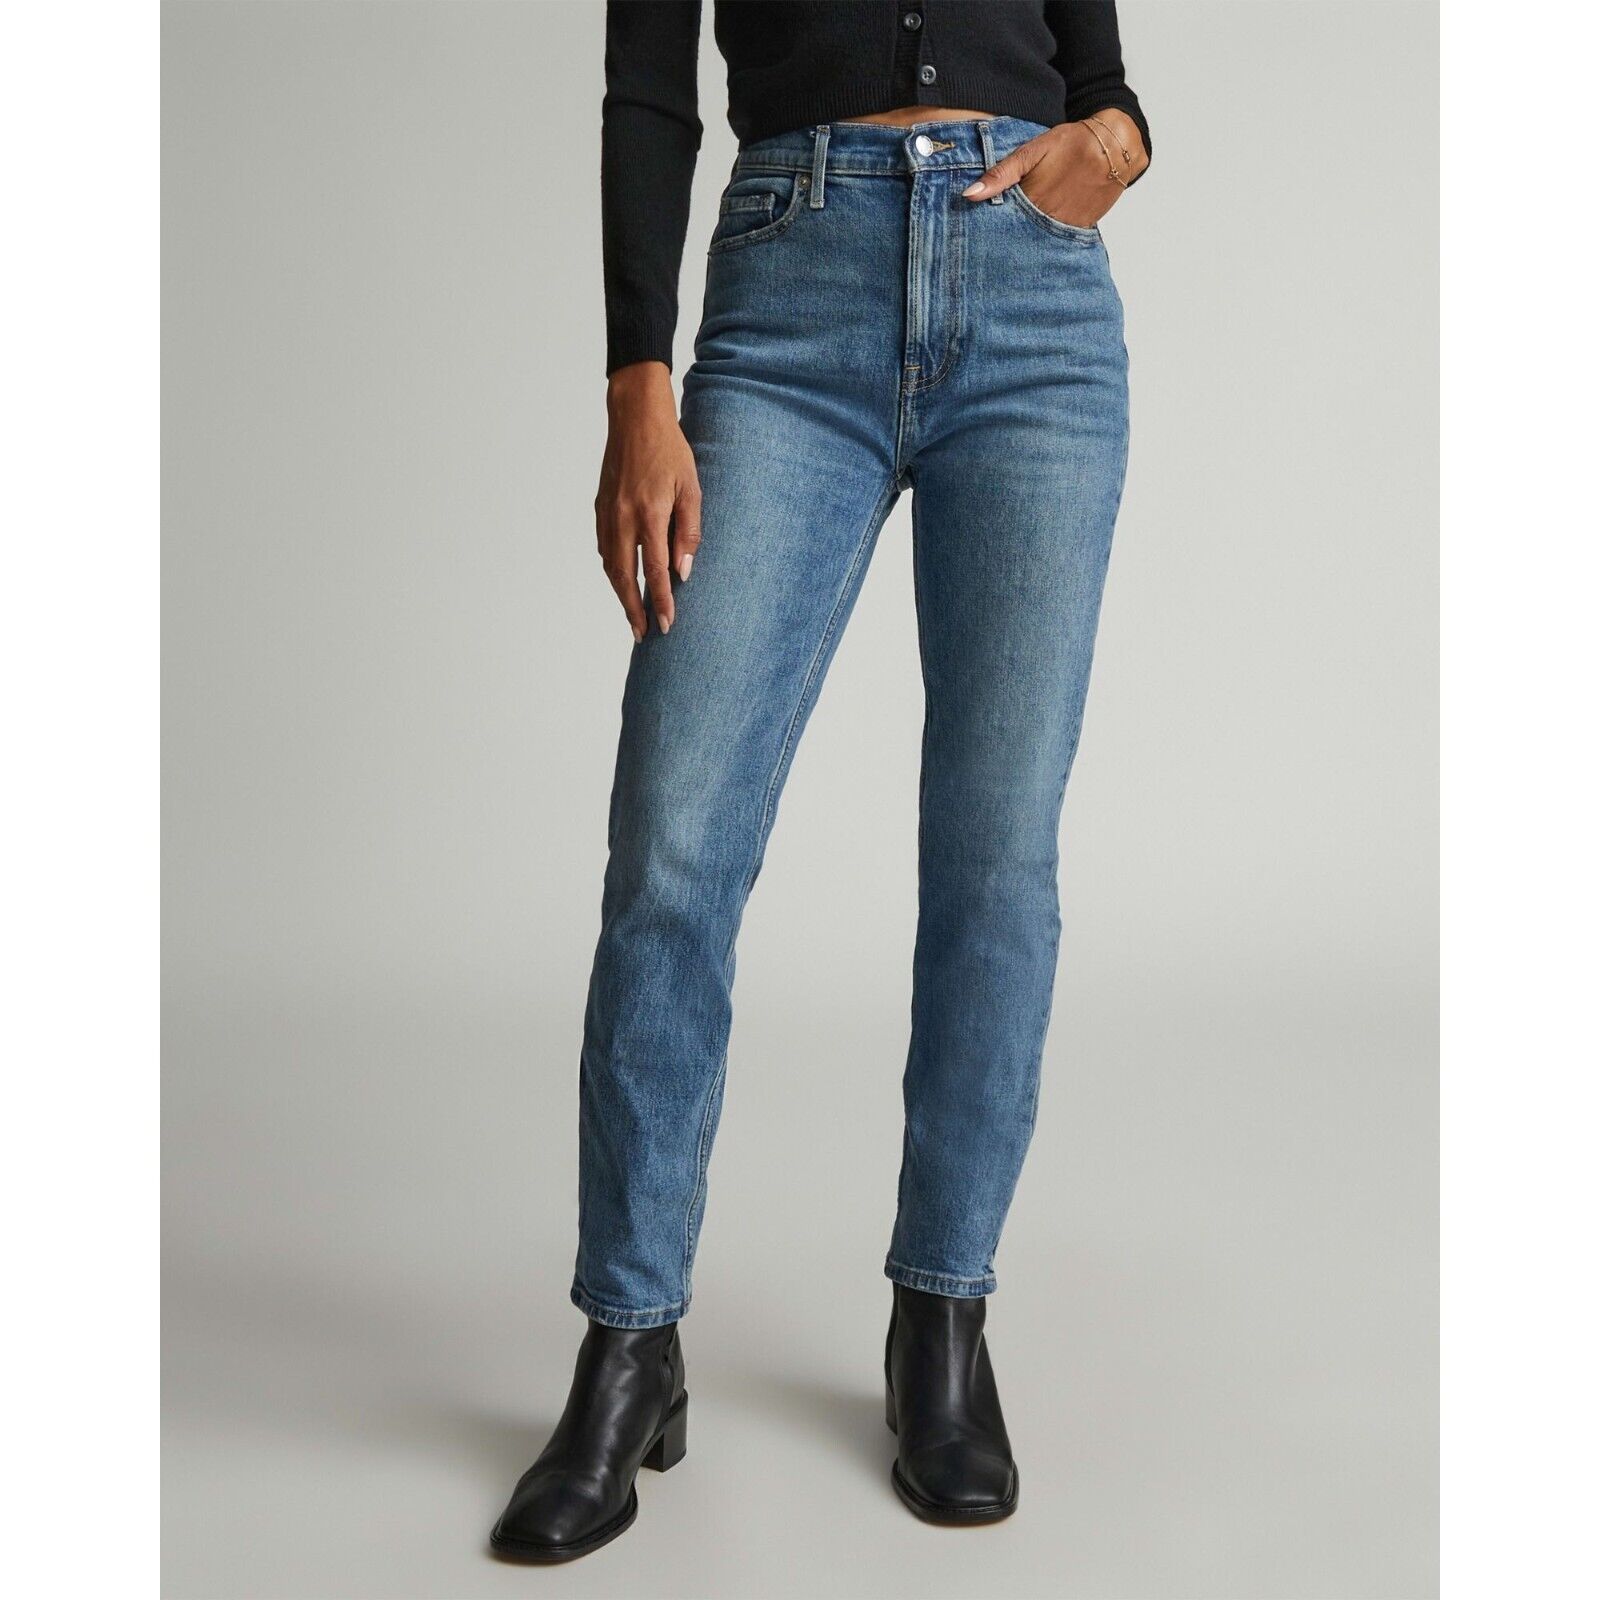 Primary image for Everlane Womens The Original Cheeky Jeans Stretch Worn-In Mid Blue 25 Crop